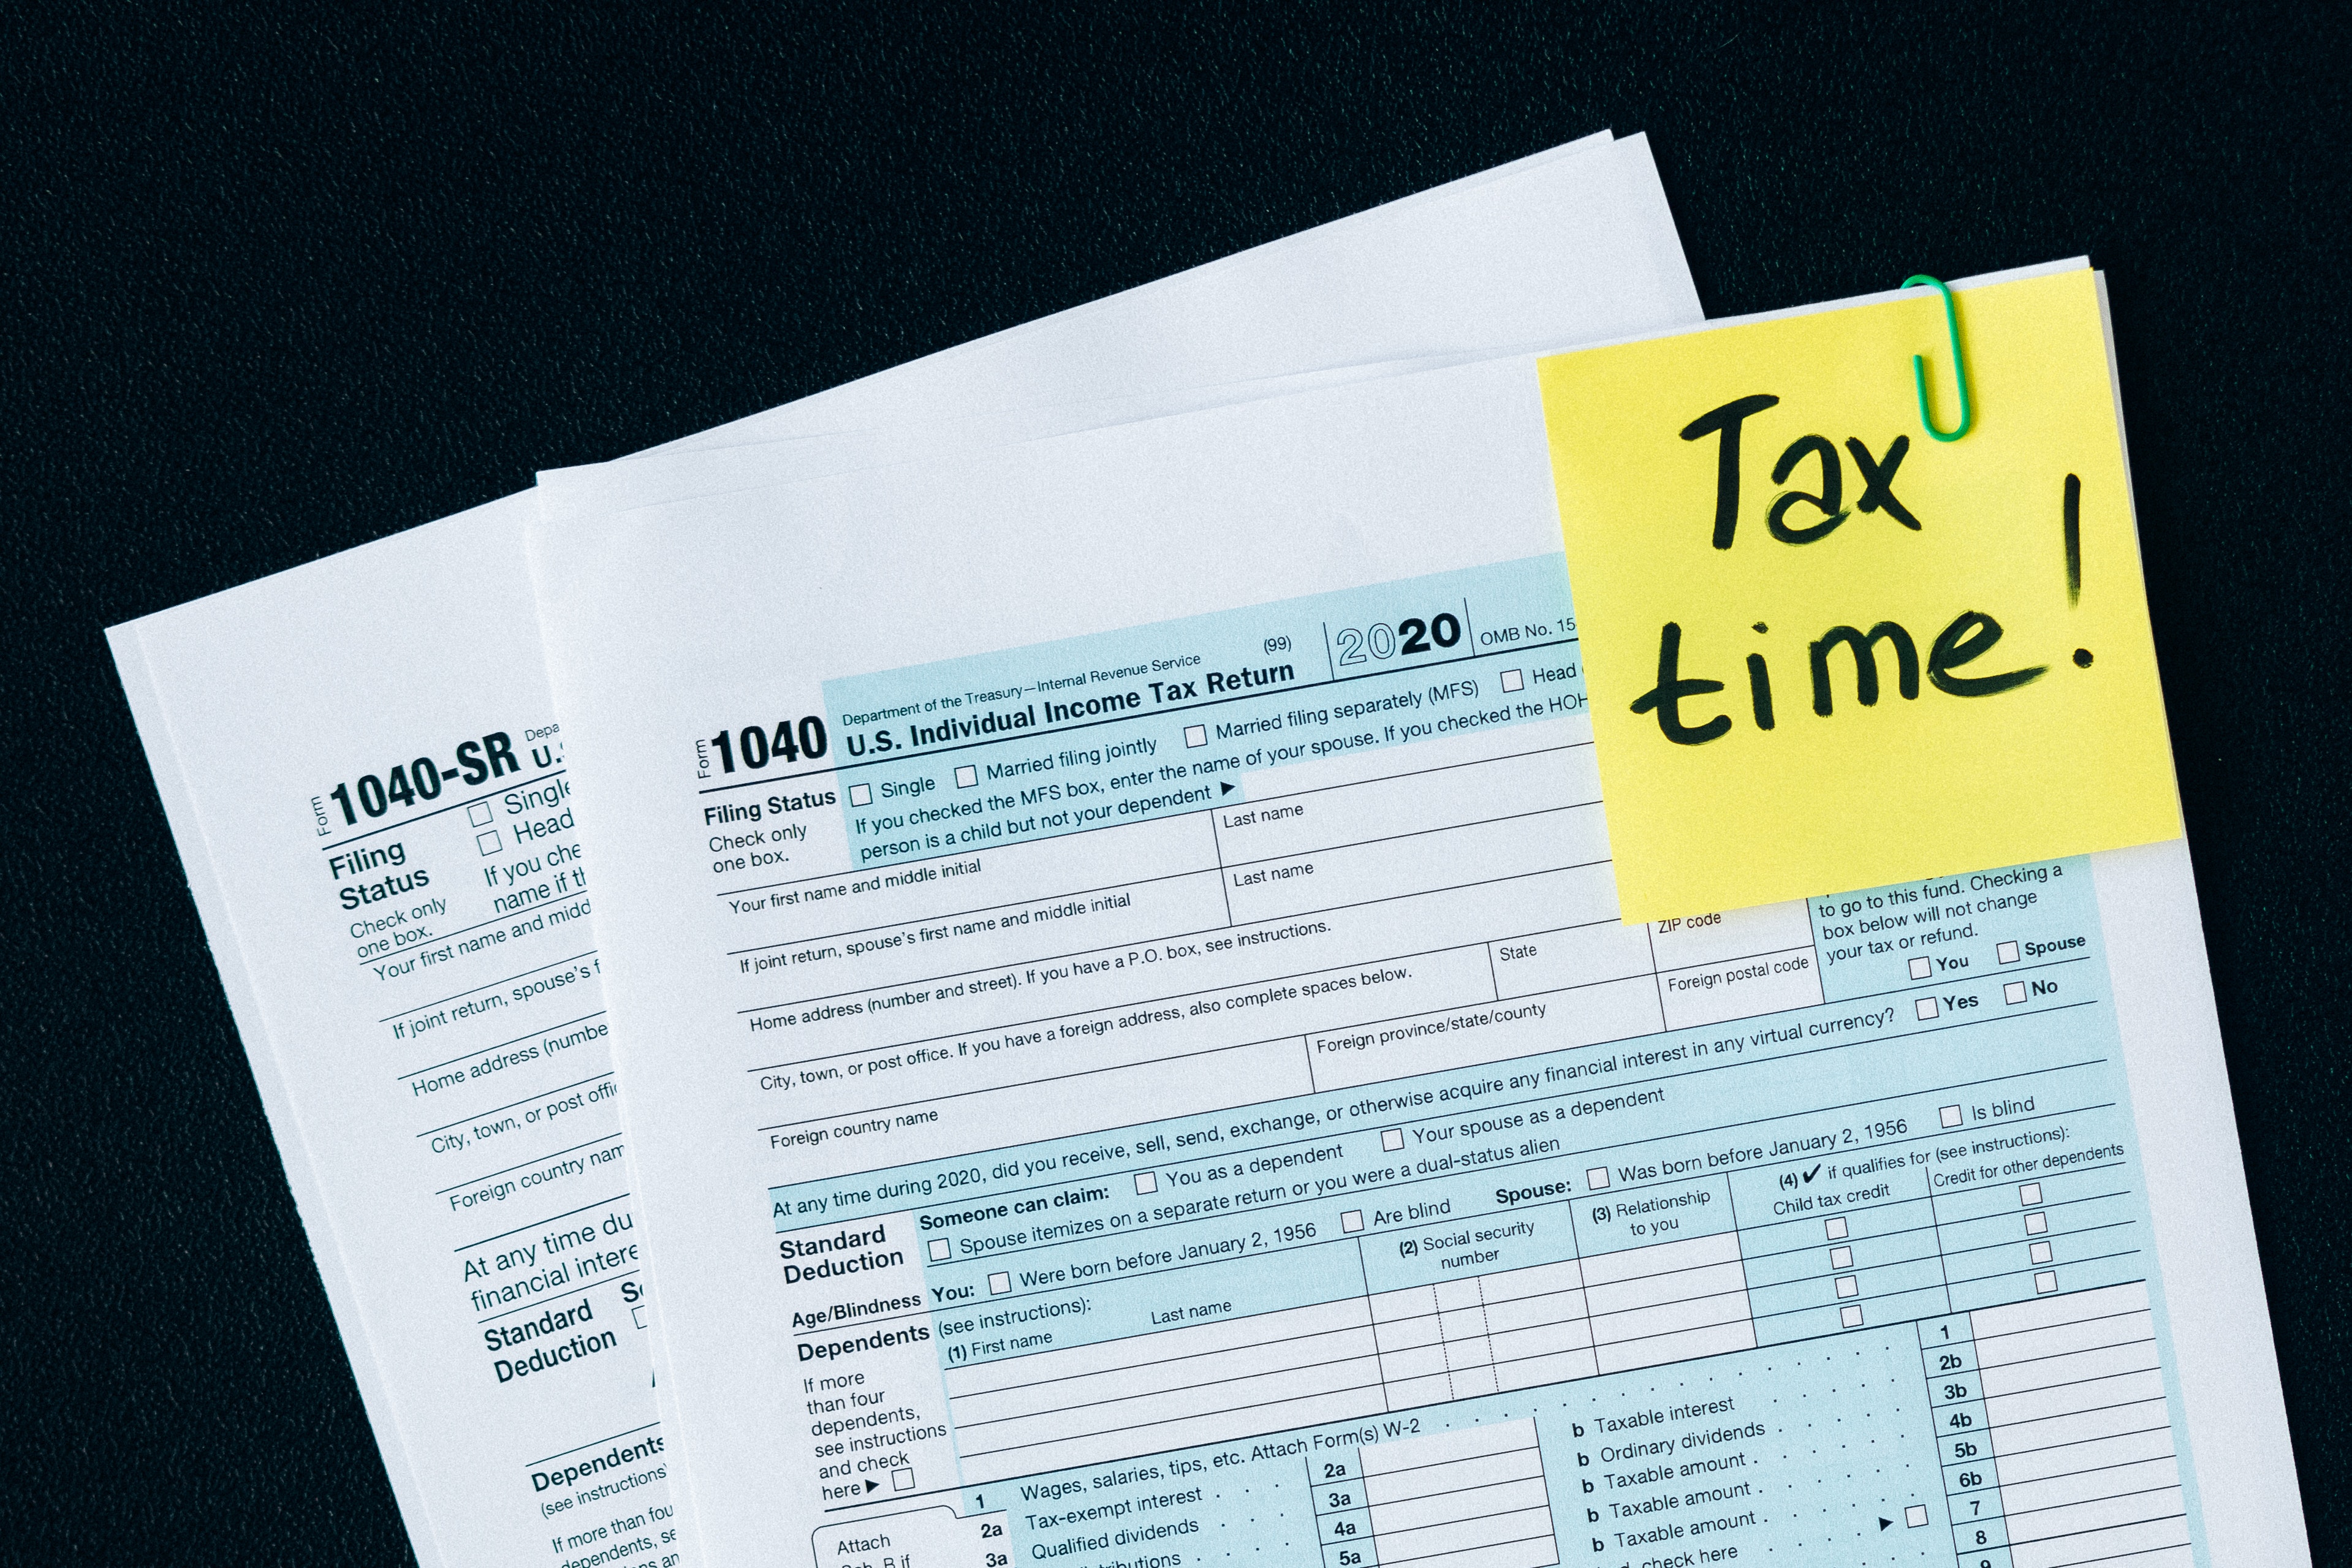 WHY SHOULD YOU ORGANIZE YOUR TAXES NOW?